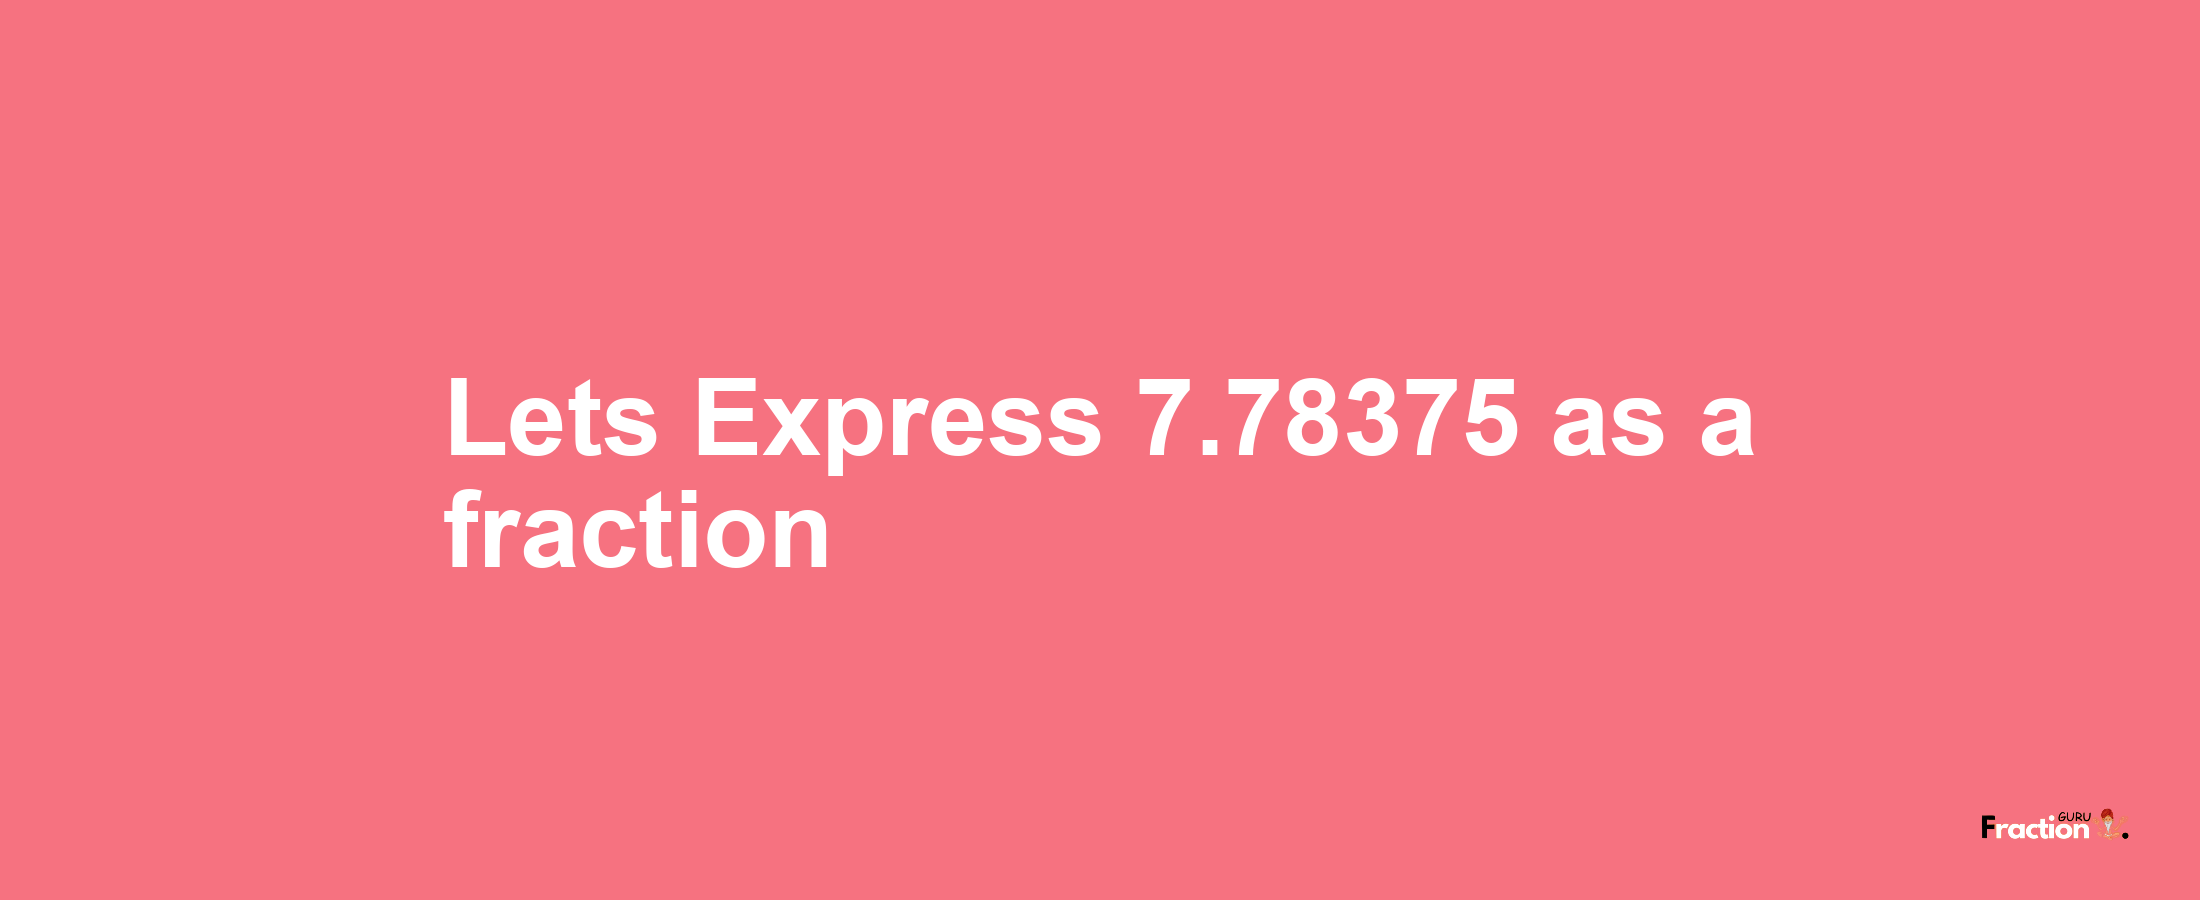 Lets Express 7.78375 as afraction